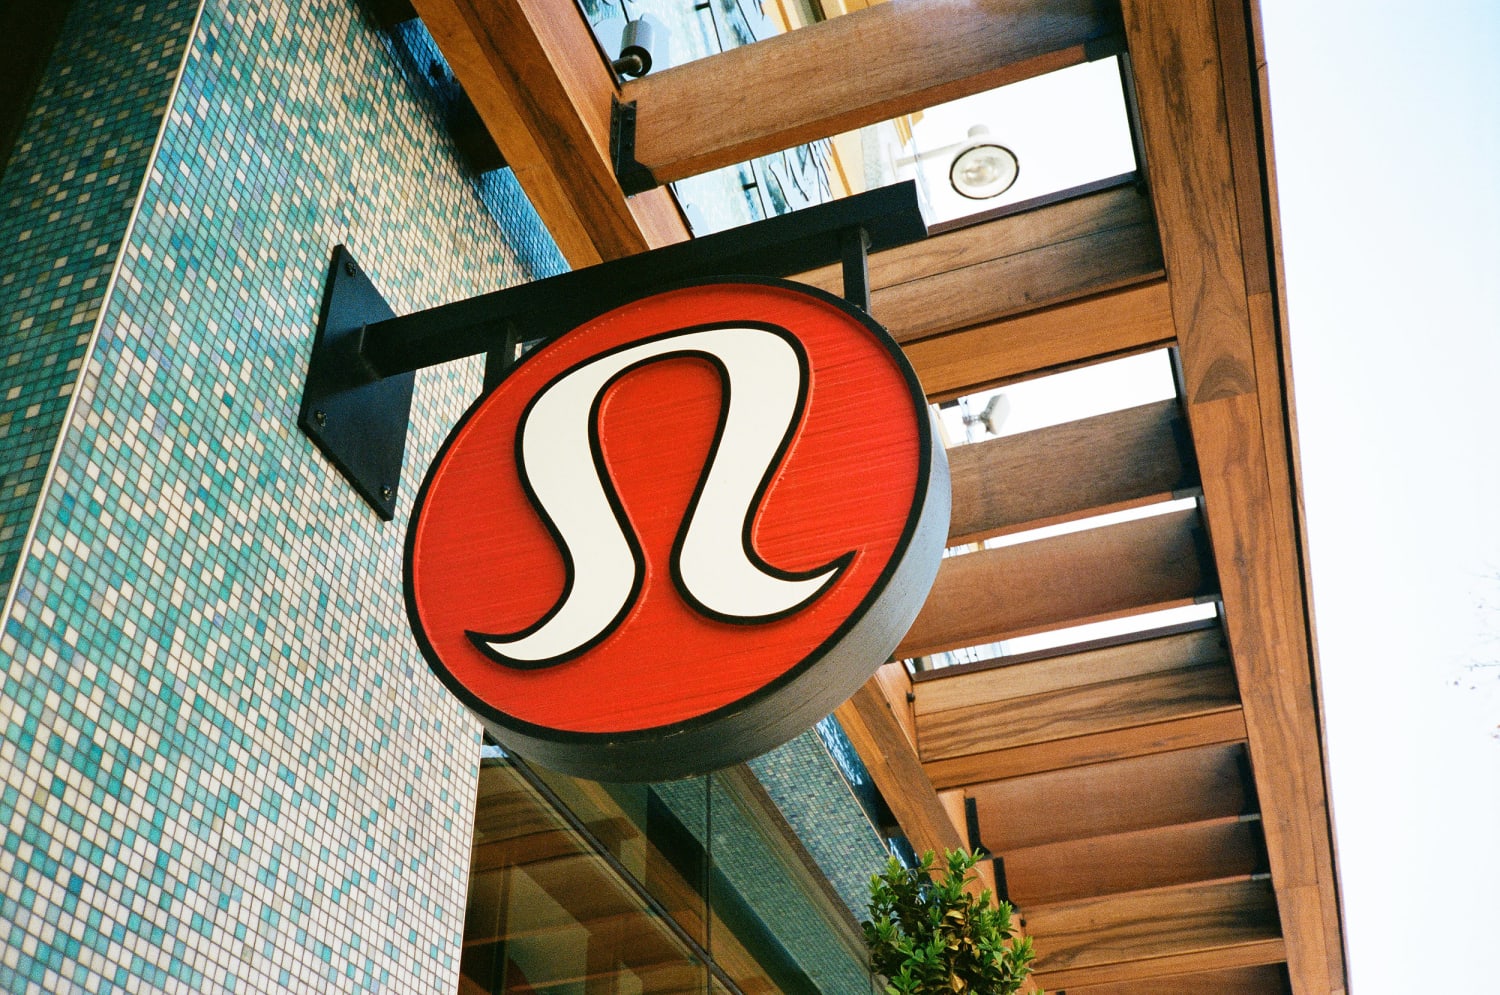 After Lululemon see-through pants fiasco, exec departs